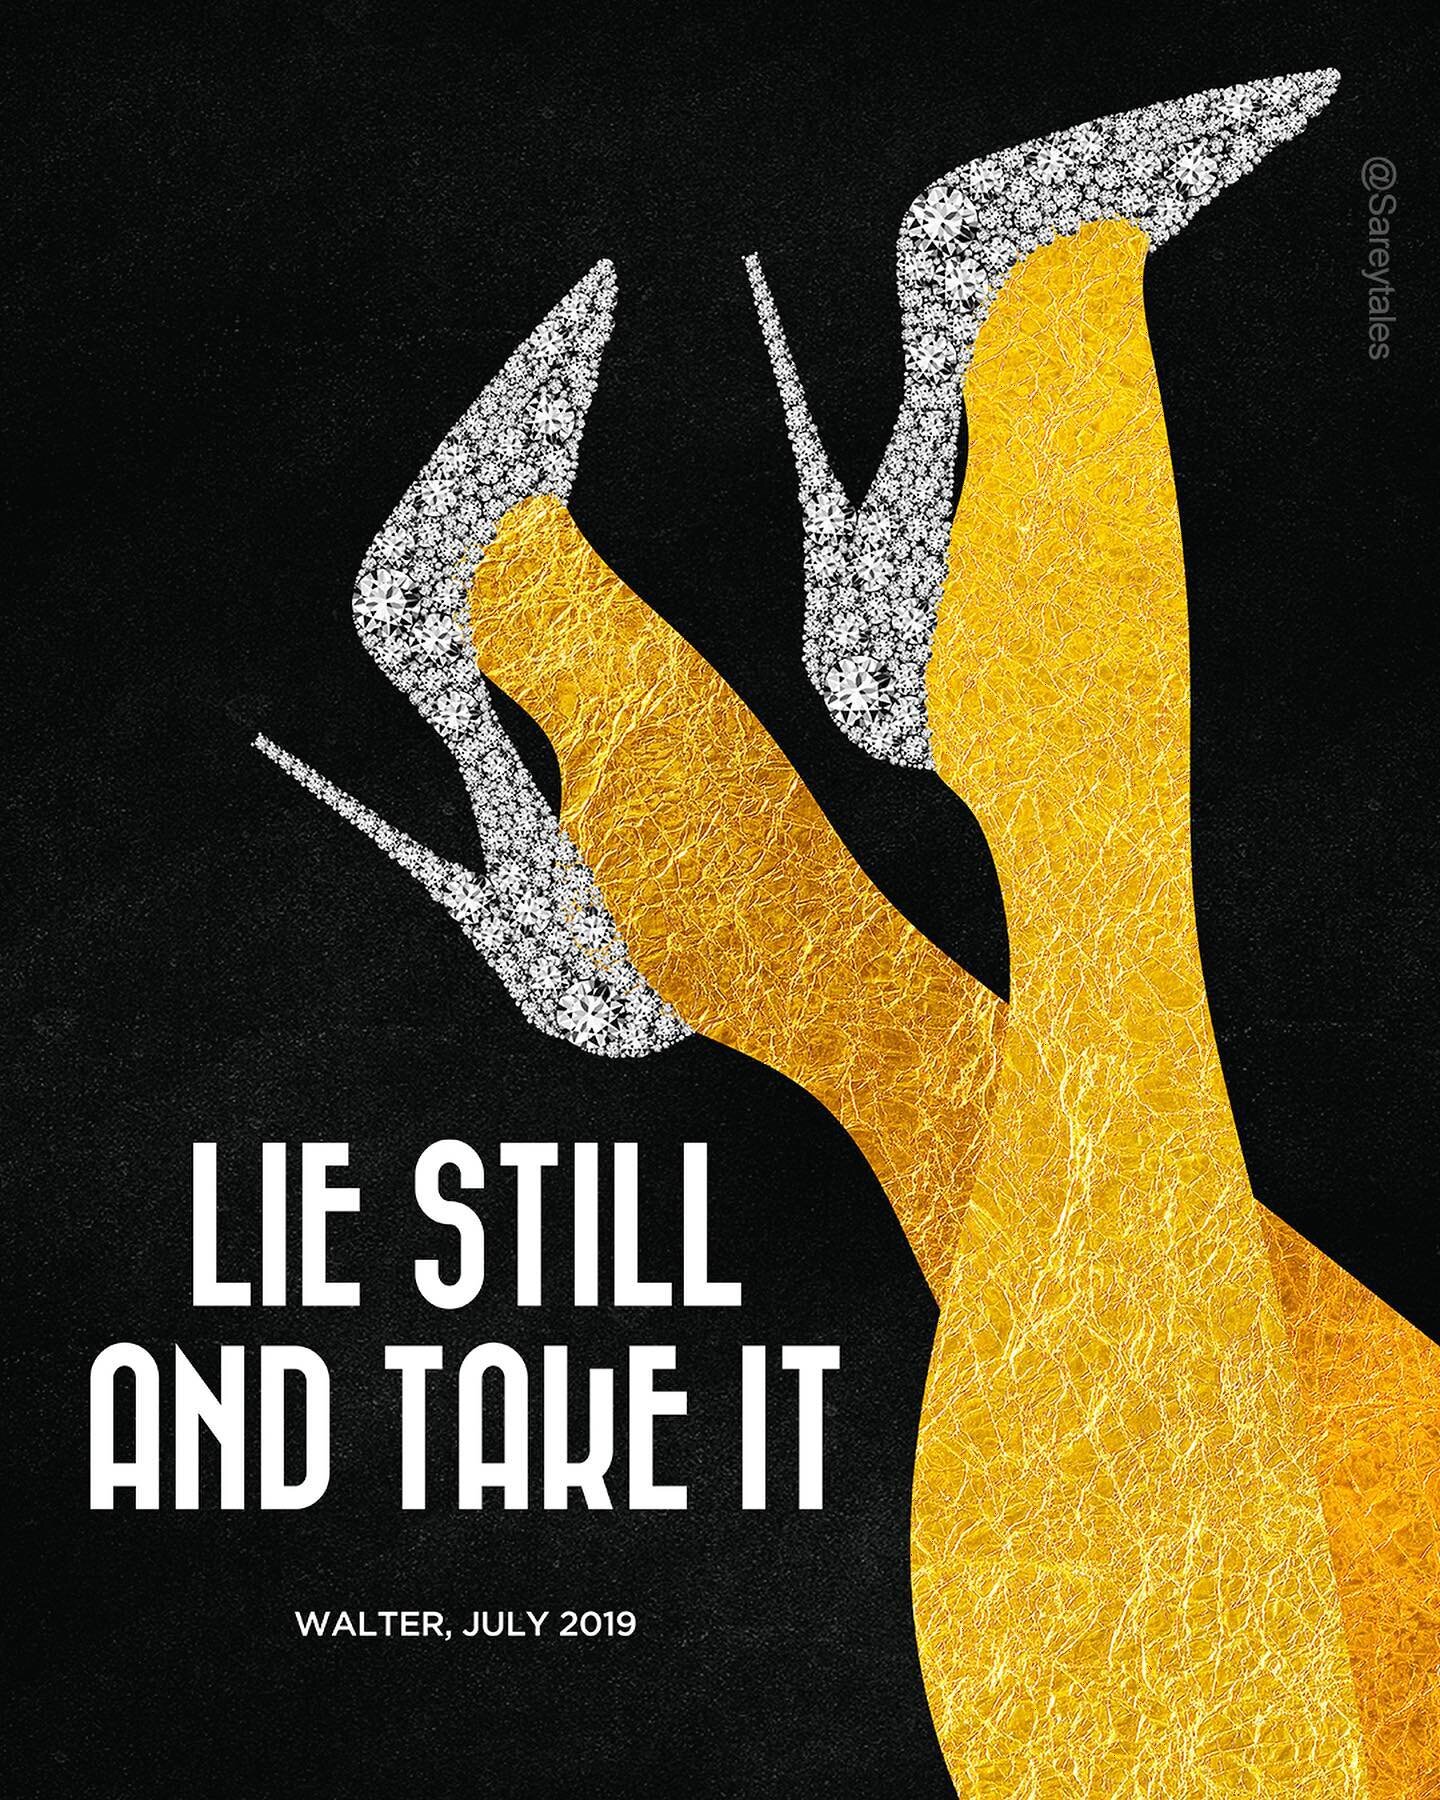 House Rule 3: Lie still and take it (digital illustration, 2019 @sareytales)

The cruelty is the point.

What&rsquo;s going on now&hellip;well for decades, and centuries actually, but even more acutely now, with reproductive agency and the stripping 